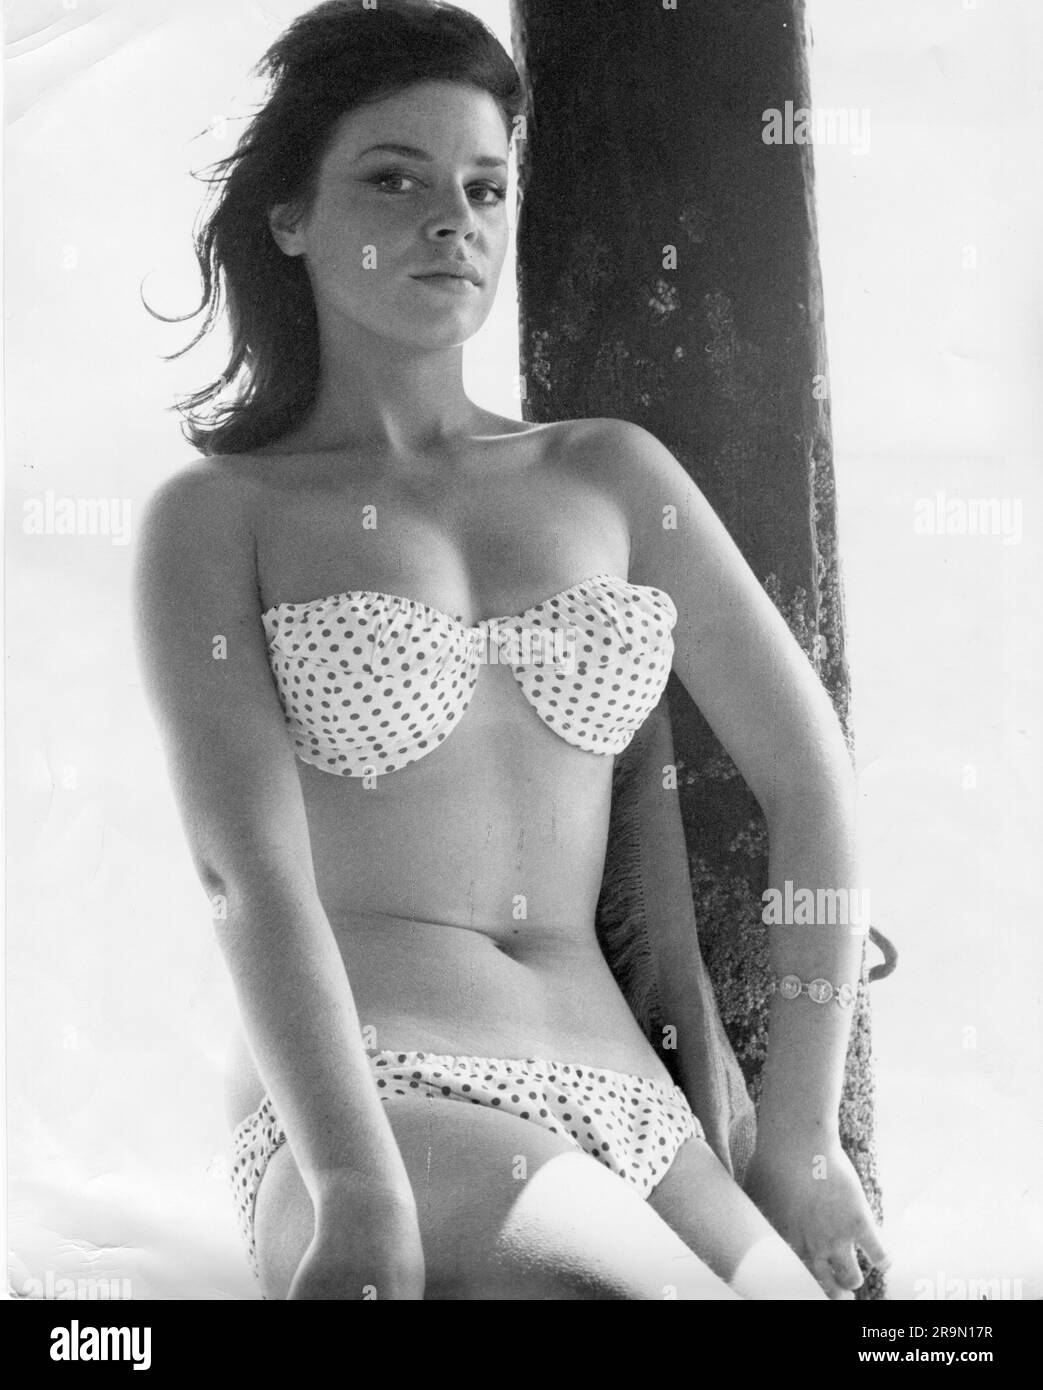 Woodcock, Carmen, britisches Model, trägt Bikini, 1960er, ADDITIONAL-RIGHTS-CLEARANCE-INFO-NOT-AVAILABLE Stockfoto